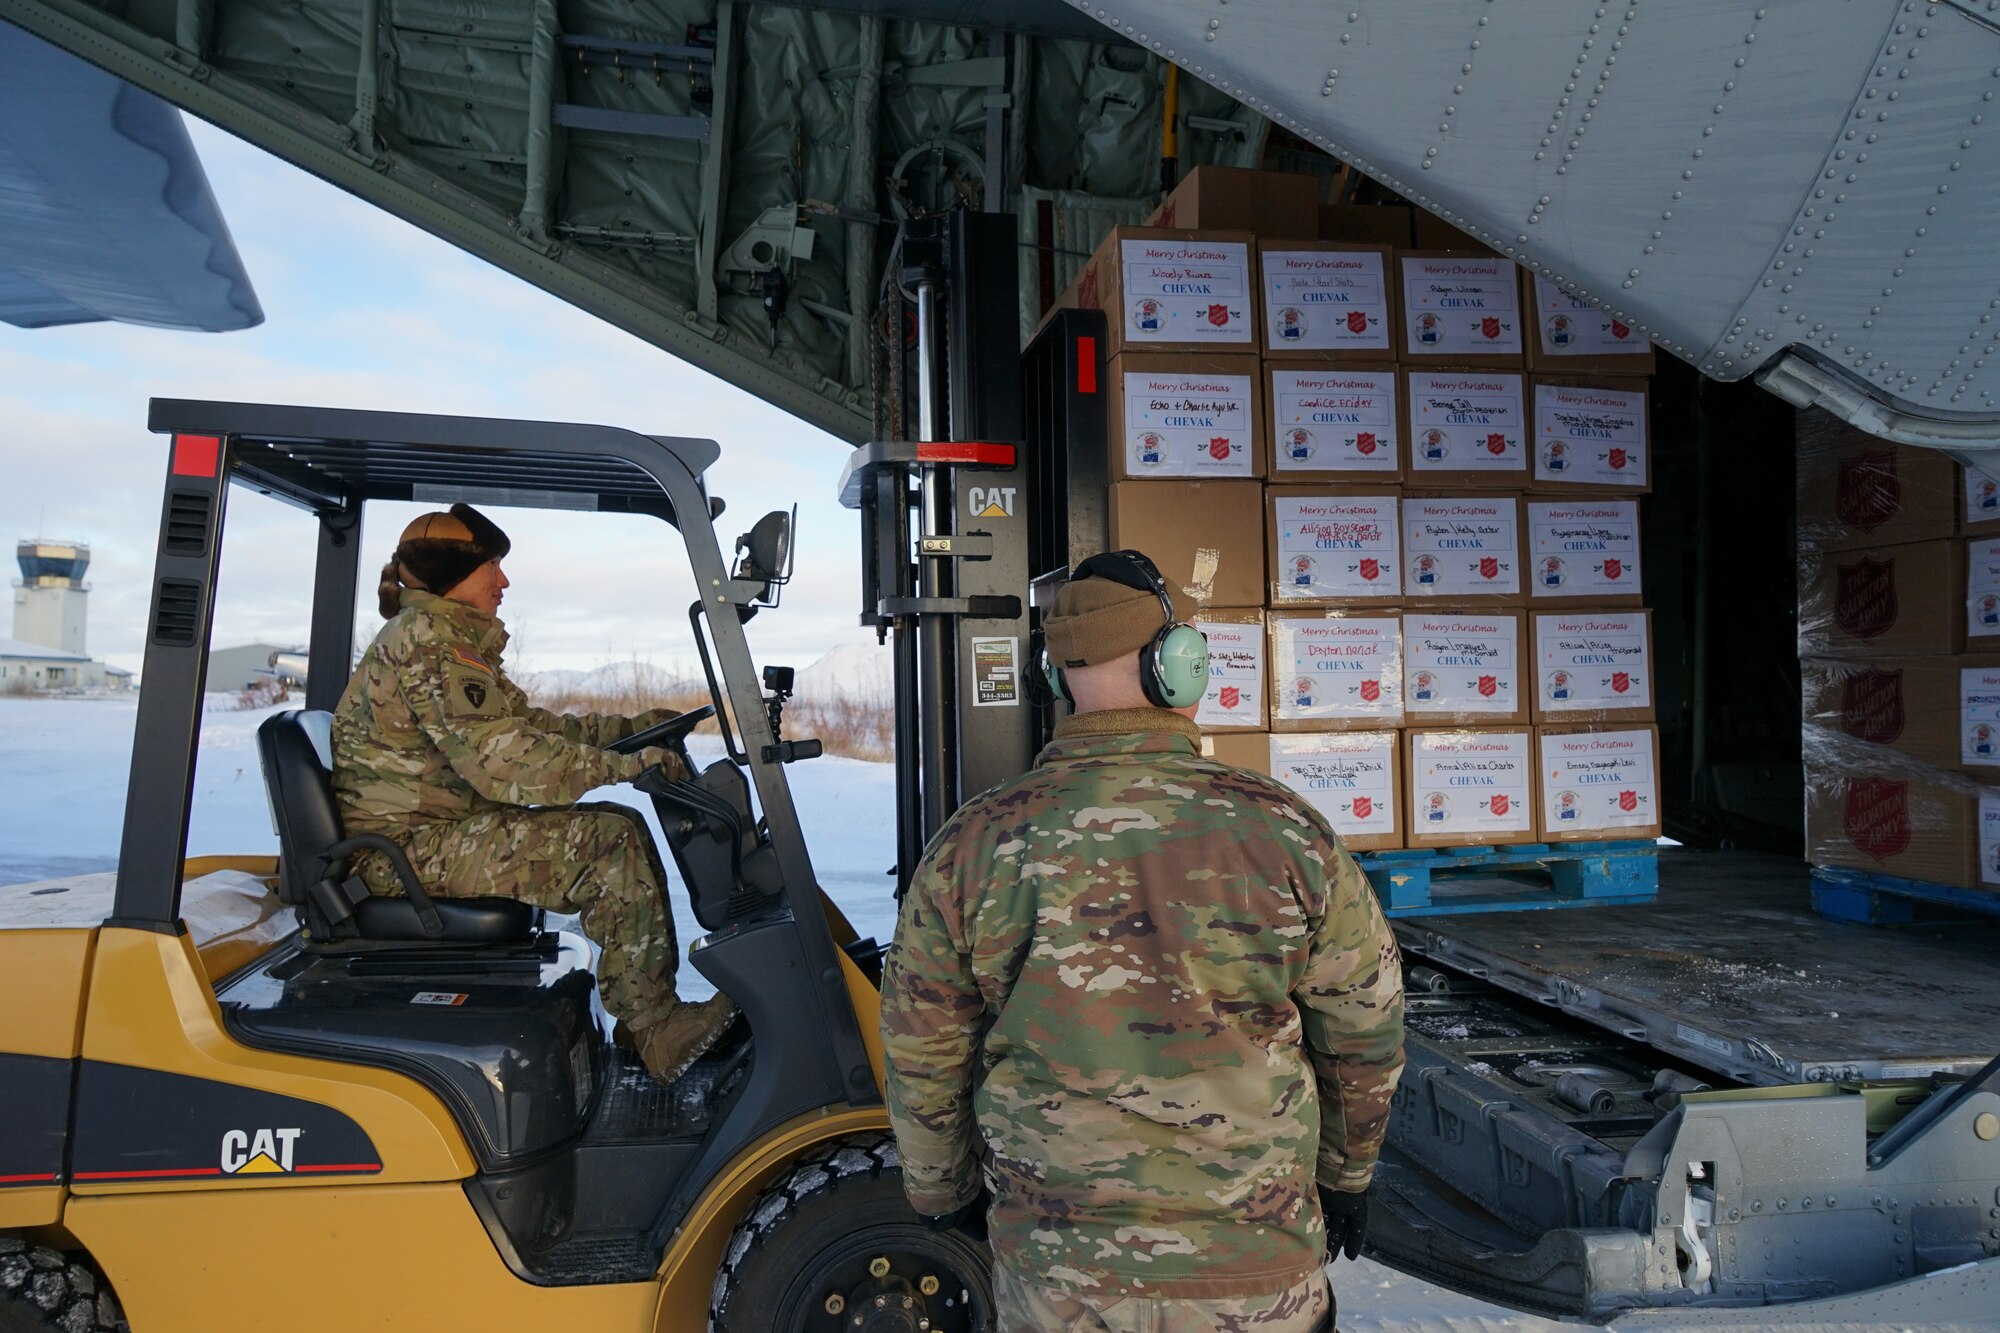 Sgt. Randell Andrew, an armory attendant in Bethel assigned to B Company, 1st Battalion, 297th Infantry Regiment, and Tech. Sgt. Michael Cashman, loadmaster assigned to 211th Rescue Squadron, unload pallets of gifts from an HC-130J Combat King II aircraft Dec. 2, 2021, at Bethel, Alaska, before they are loaded onto an UH-60L Black Hawk helicopter for further delivery to Chevak as part of Operation Santa Claus 2021. Op Santa is an Alaska National Guard annual community outreach program that provides gifts, books, school supplies and stocking stuffers to children in rural Alaskan communities. This year marks the 66th year of the program, which began in 1956 after the village of St. Mary's experienced a year of hardship and the Alaska Air National Guard flew in gifts and supplies donated by the local community. The Alaska National Guard was able to continue the tradition this year and safely provide gifts despite COVID-19. (U.S. Army National Guard photo by Dana Rosso/Released).